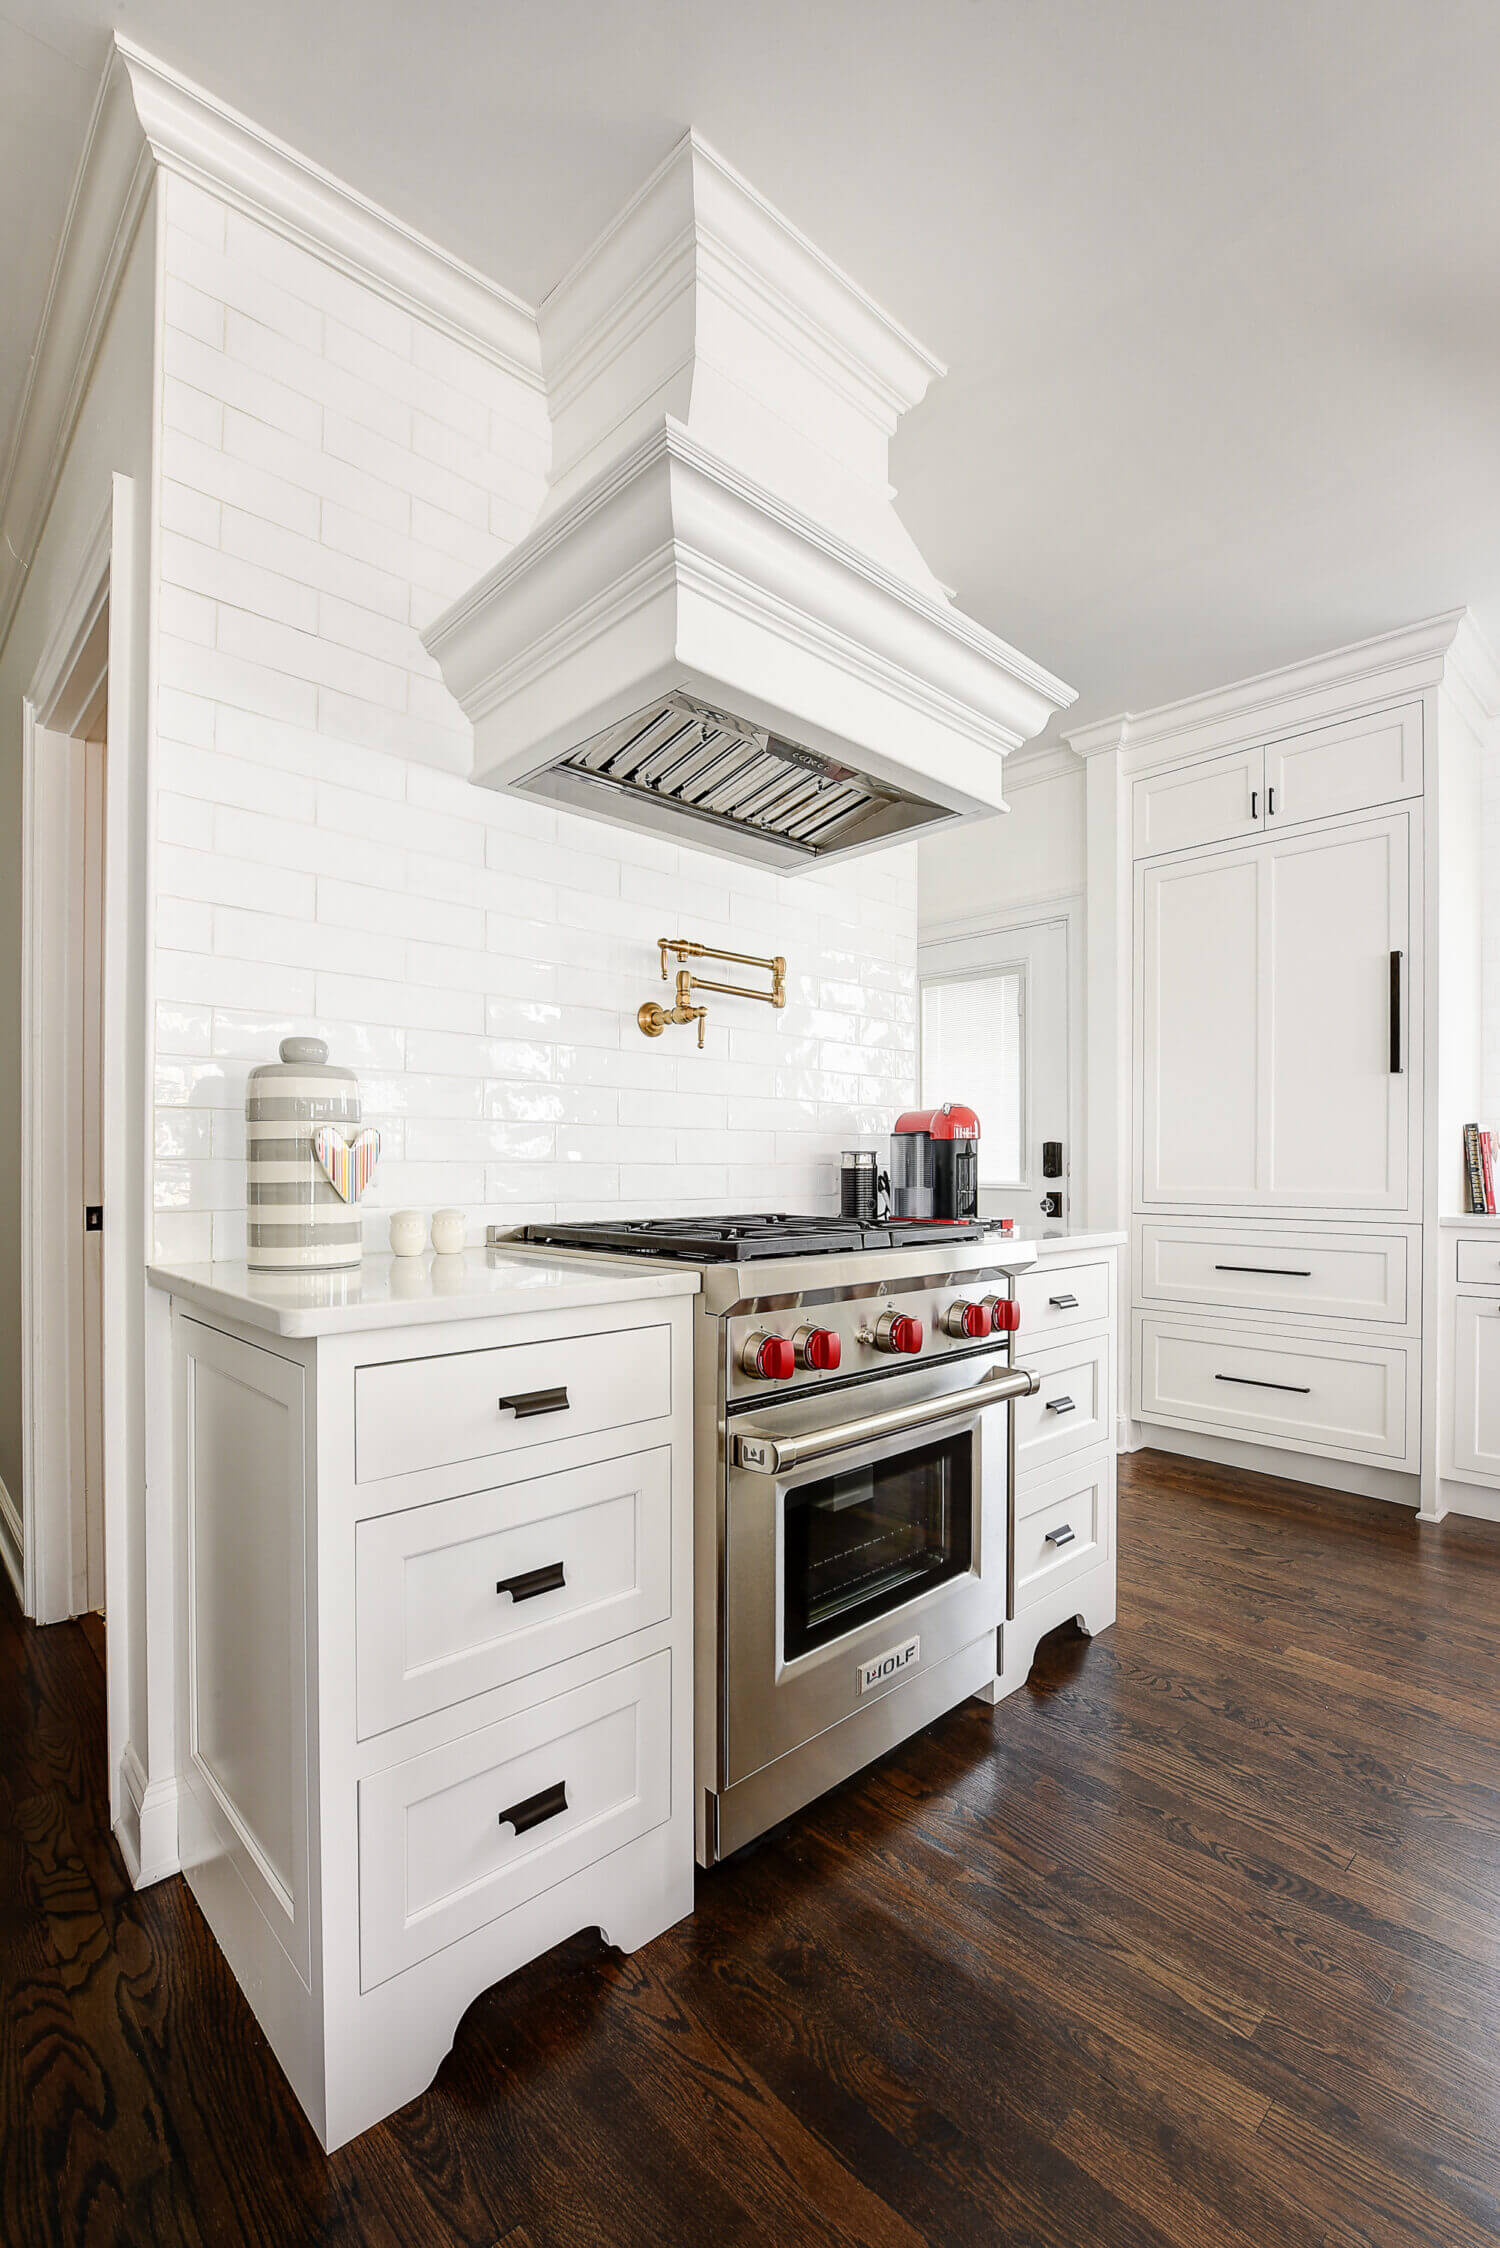 The range an cook top in this remodeled kitchen sits in the center of a the room. The designer highlighted the area with a full wall subway backsplash that surrounds and emphasizes a beautiful white painted wood hood.